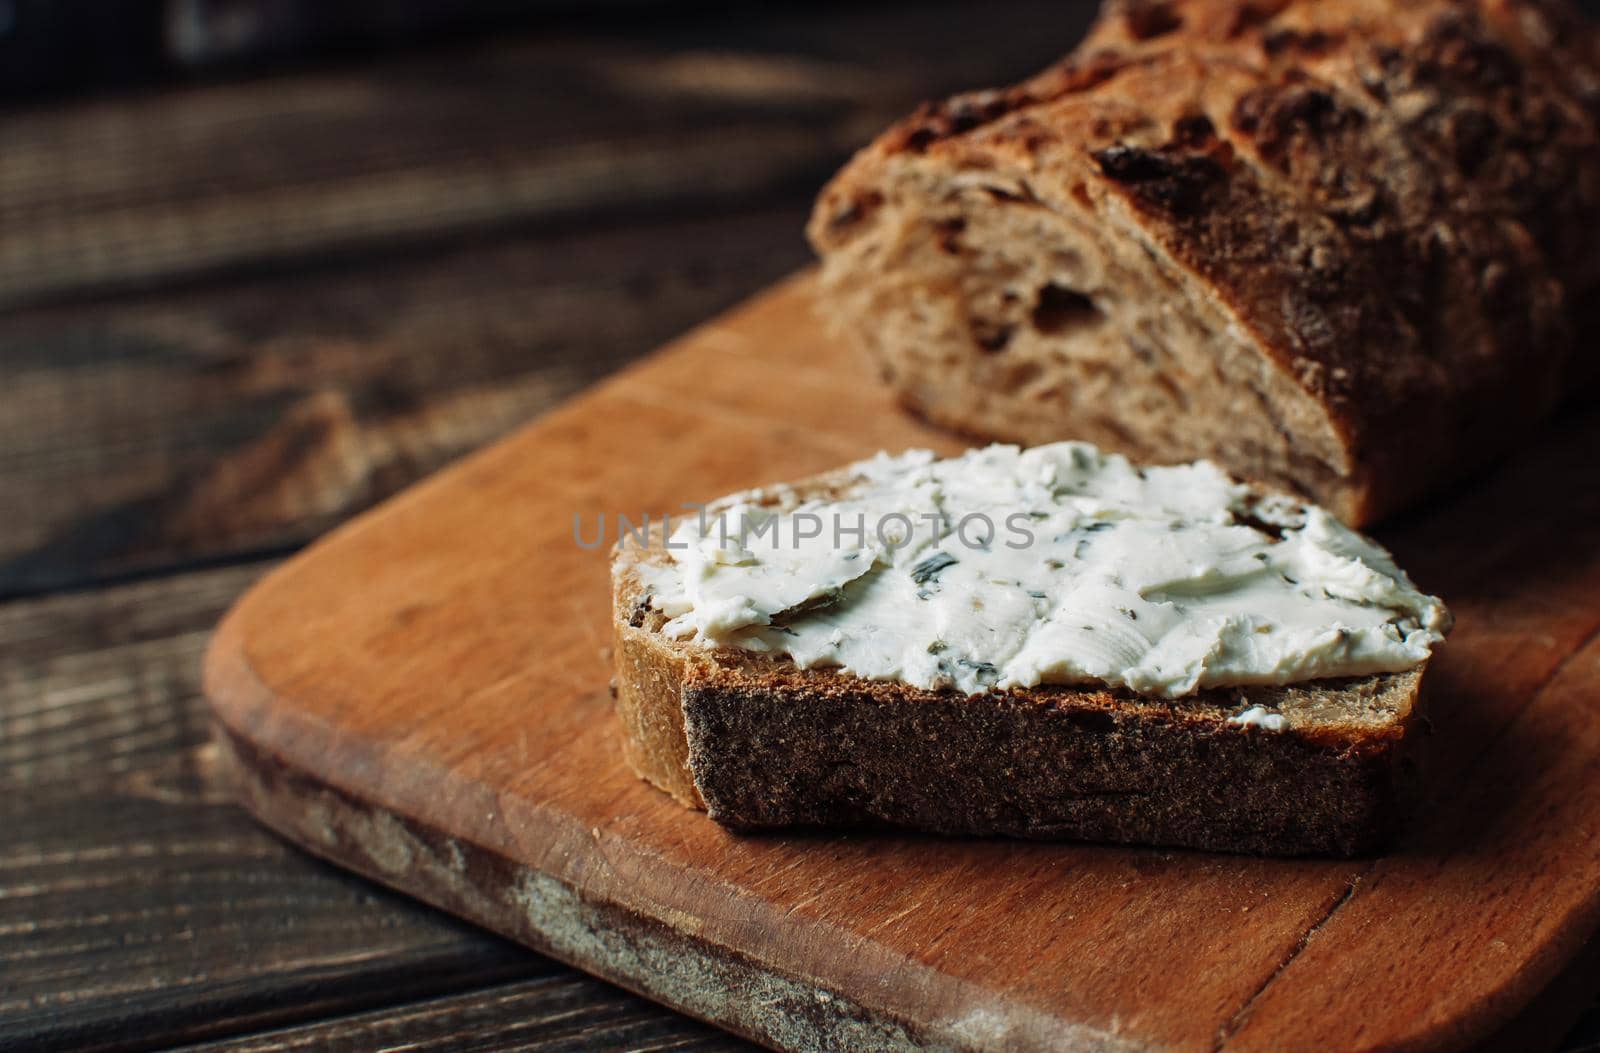 dark bread is spread with cottage cheese with herbs in a cut on a wooden board on a wooden table in a rustic style. Snack and breakfast concept. Selective focus.